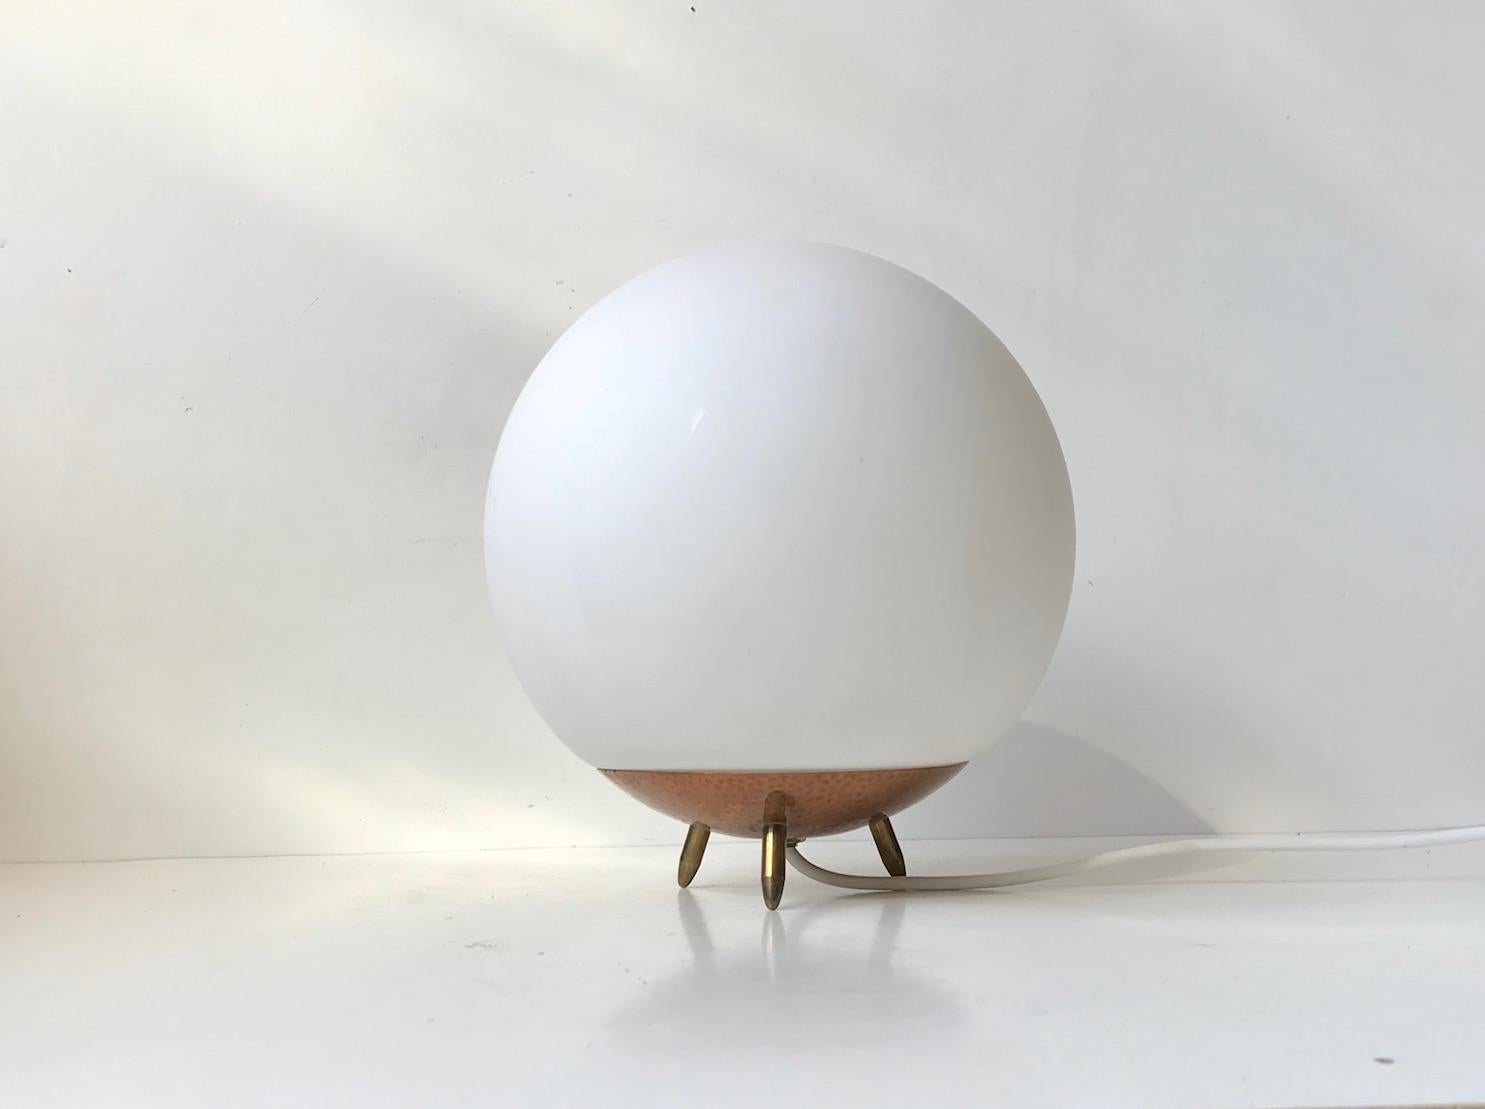 Unusual, small and yet voluminous table lamp composed of a stylized tripod hammered copper and brass base and a free-resting mat white opaline glass sphere. In Scandinavia we call this design a 'Space Bug'. It was manufactured in Scandinavia during